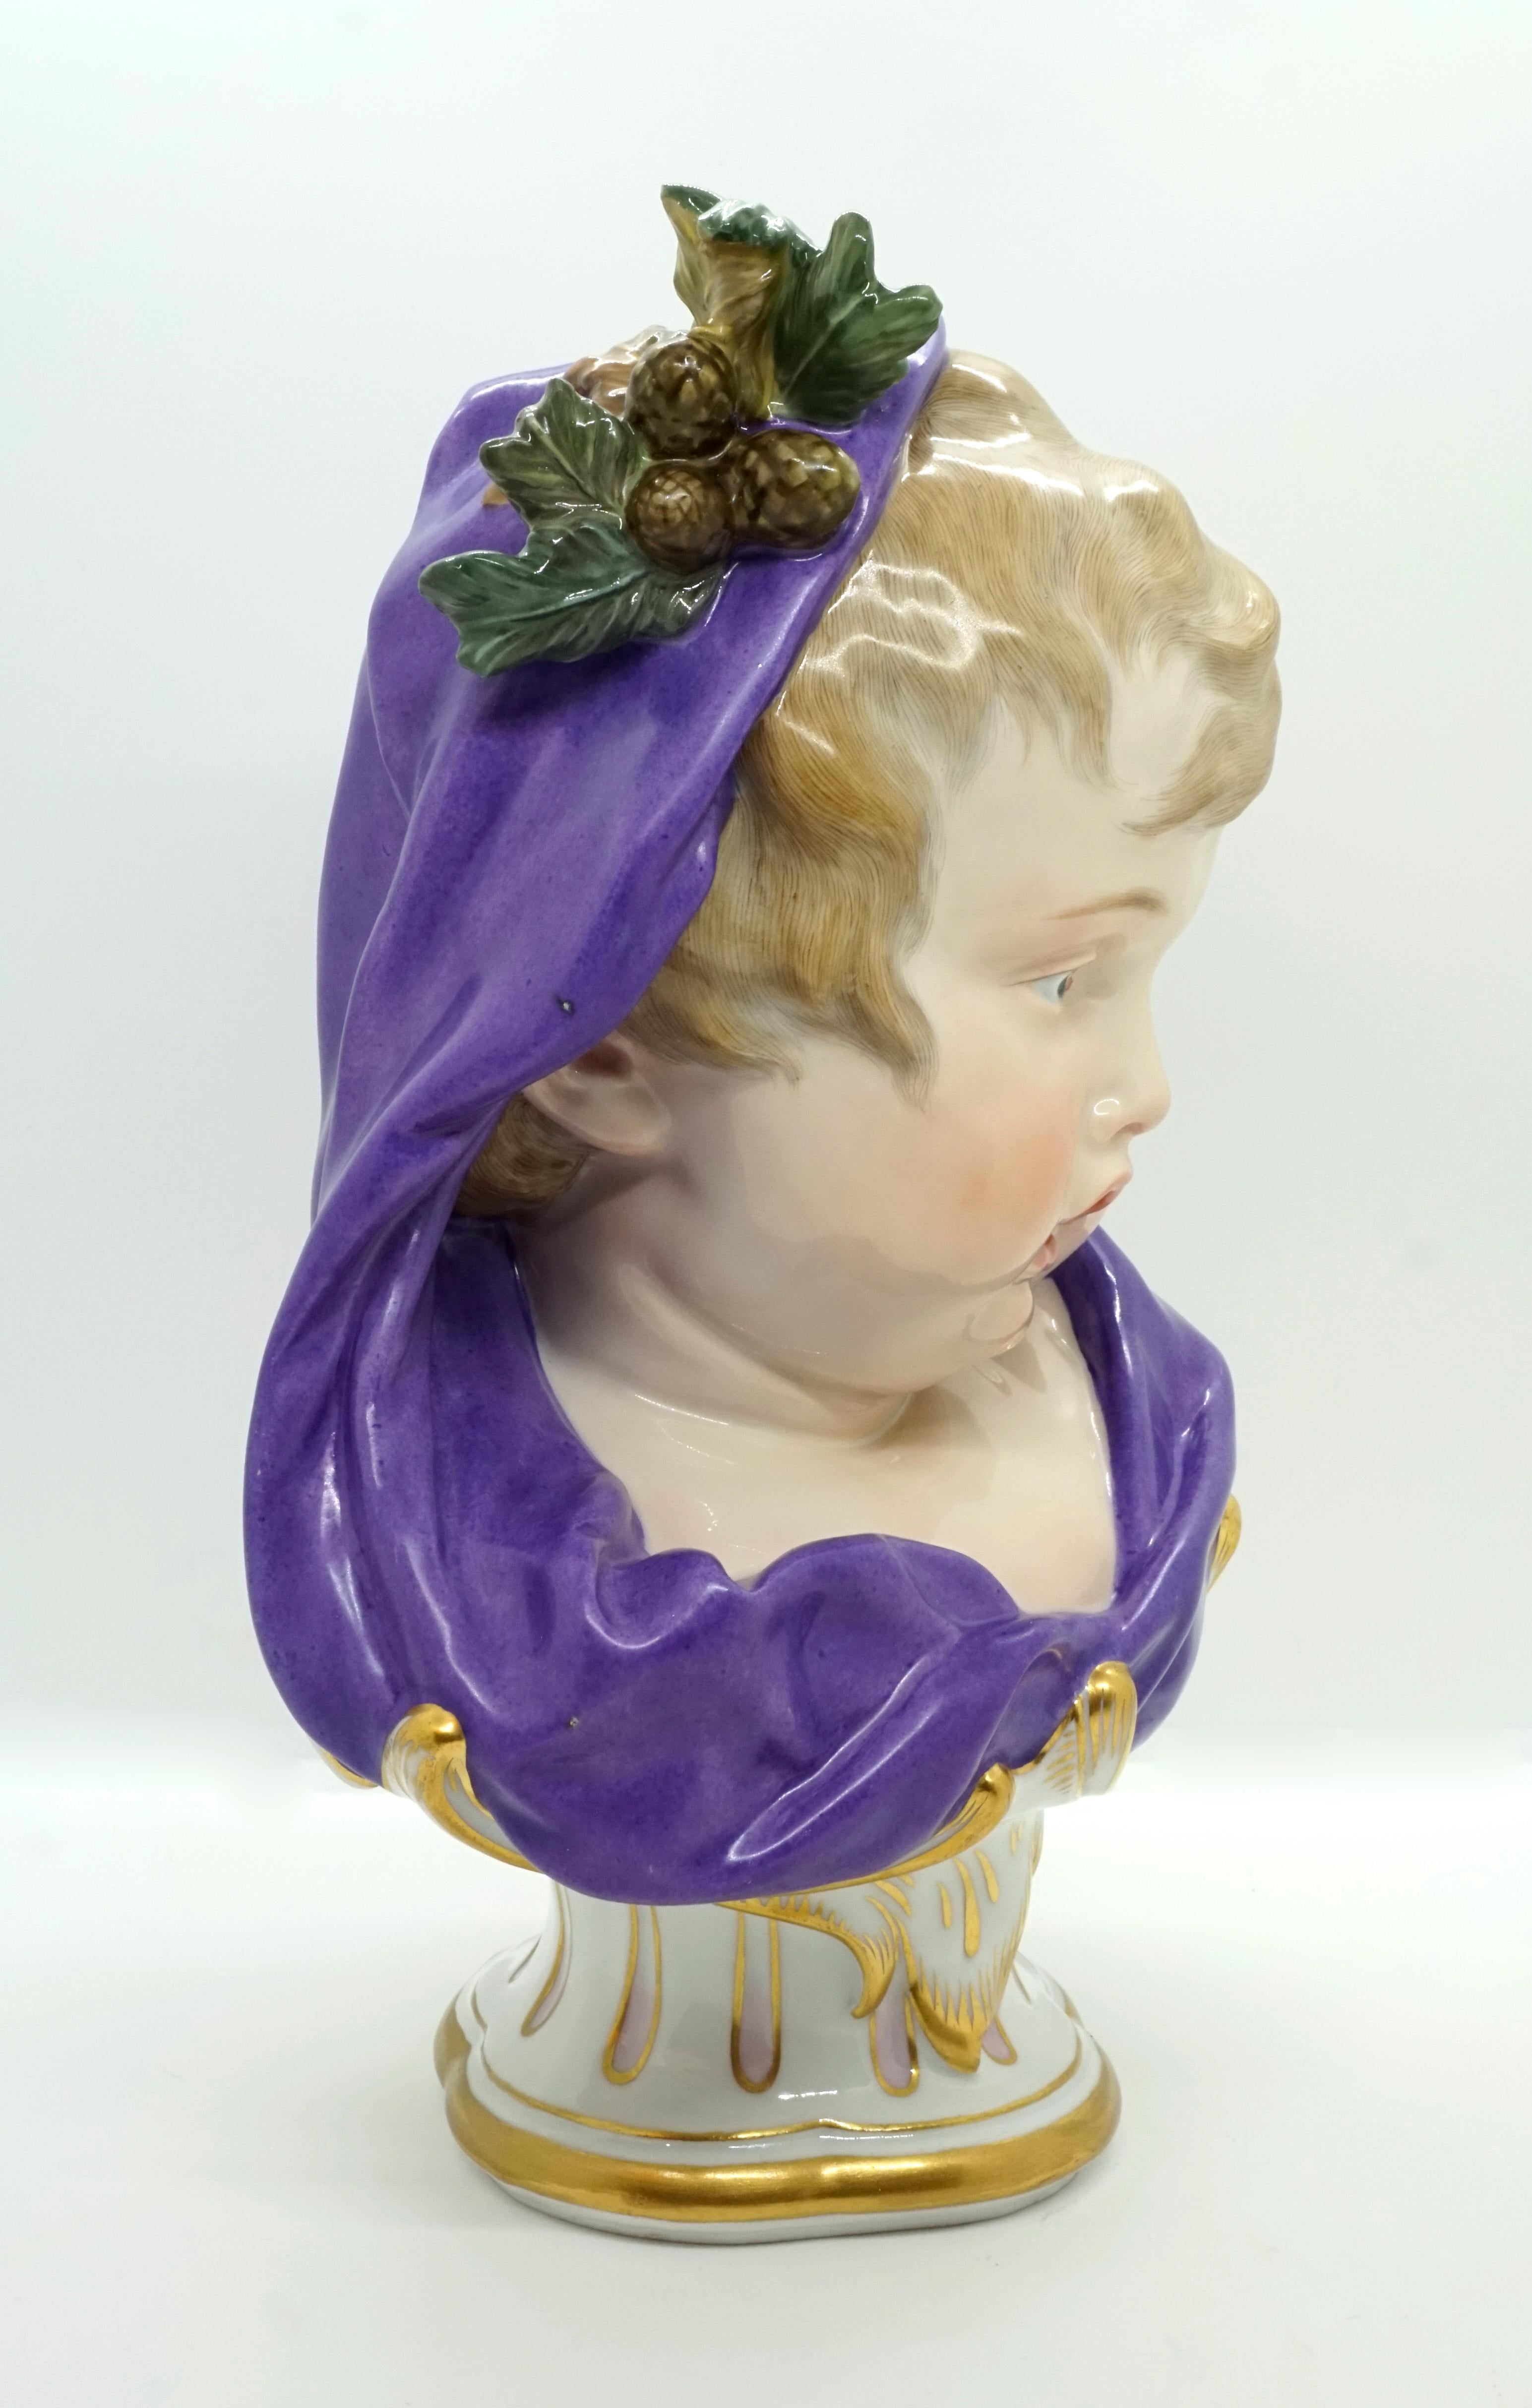 Bust of a boy with a purple cloak, which, like a hood, covers his blond curls, adorned with needle branches and cones.
On a matching curved base with a four-pass plan, rocailles and gold decoration.
Extremely loving design down to the smallest